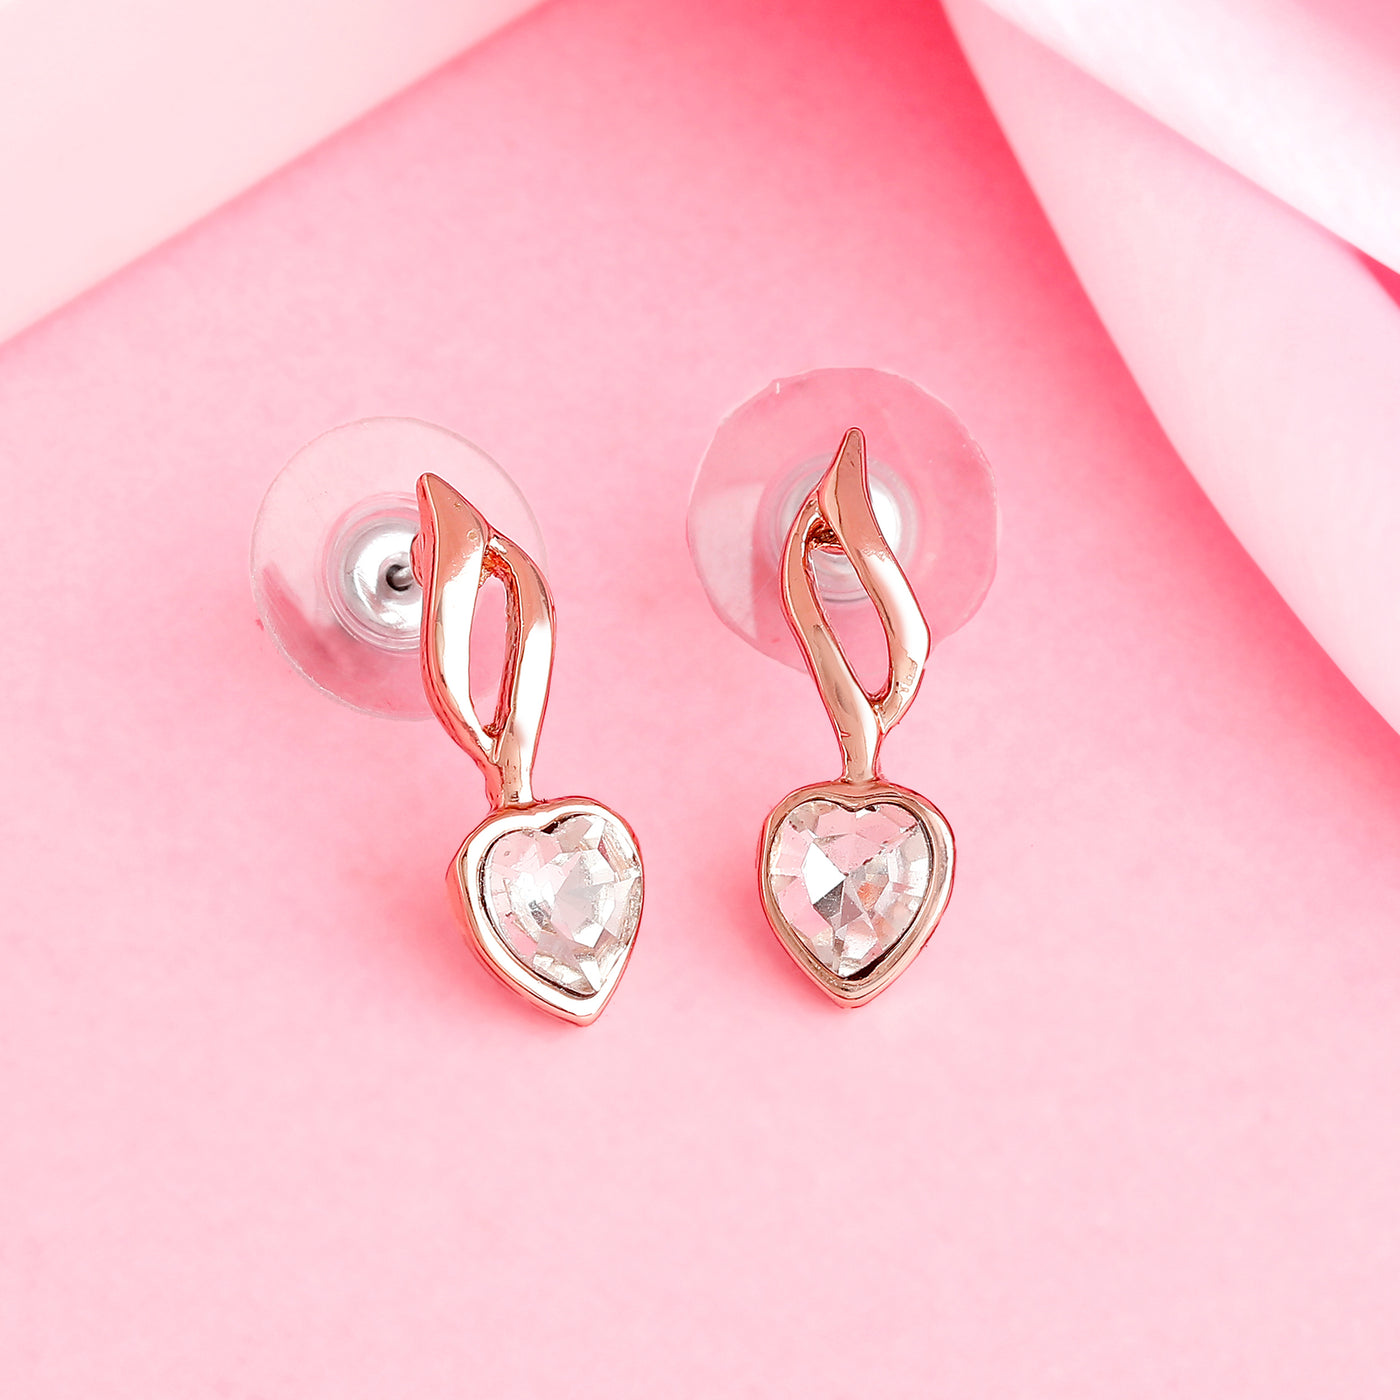 Estele Rose Gold Plated Heart Shaped Earrings with White Crystal for Women